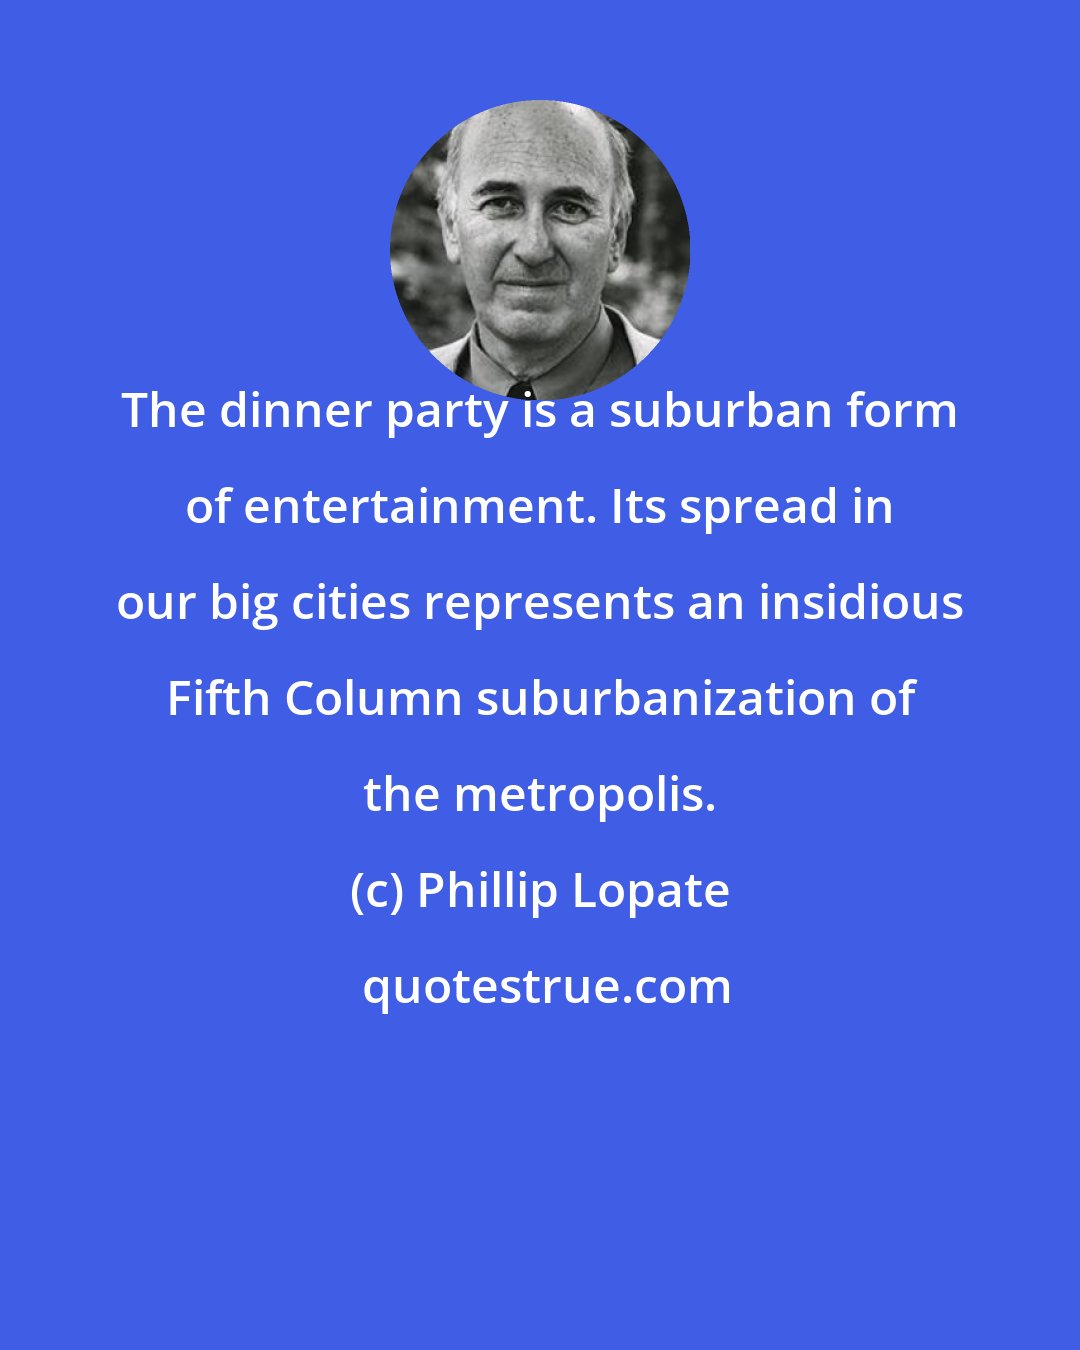 Phillip Lopate: The dinner party is a suburban form of entertainment. Its spread in our big cities represents an insidious Fifth Column suburbanization of the metropolis.